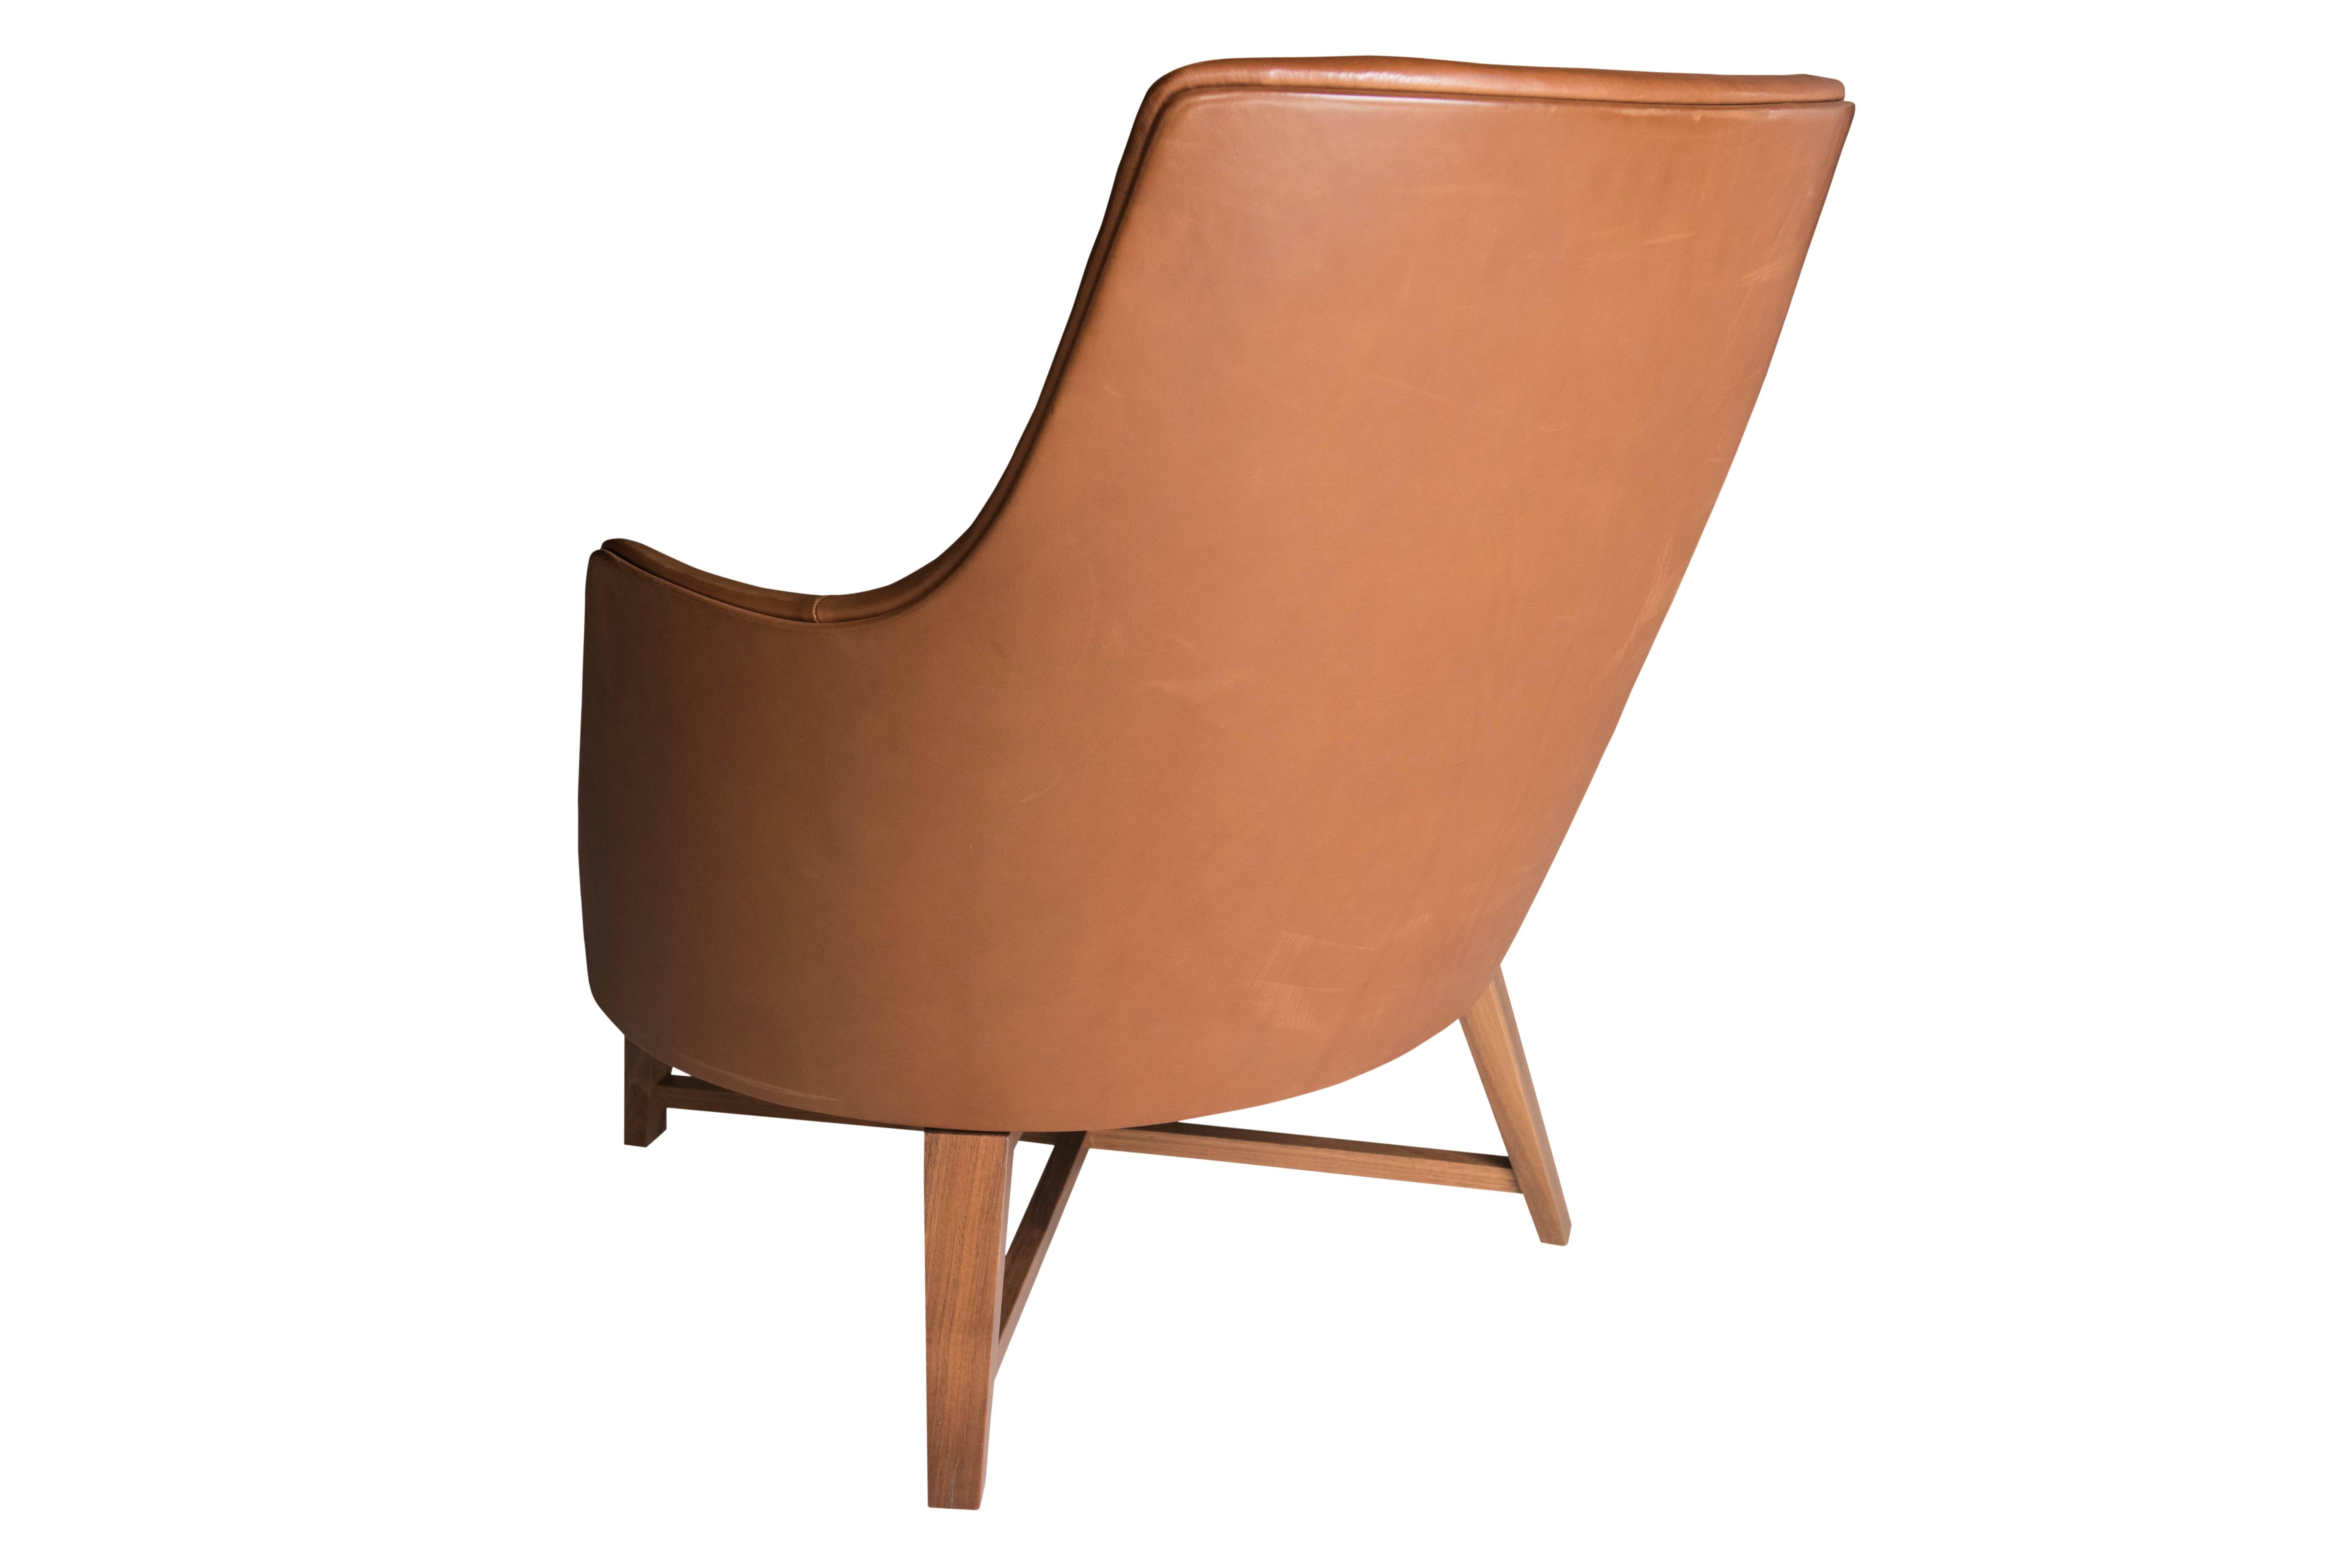 
Frame: In rigid and pressed polyurethane.

Seat cushion: Filled with down and a resilient inner core.

Base: In massive wood.

Upholstery: Leather.

About the designer.

Antonio Citterio.

Antonio Citterio was born in Meda in 1950 and